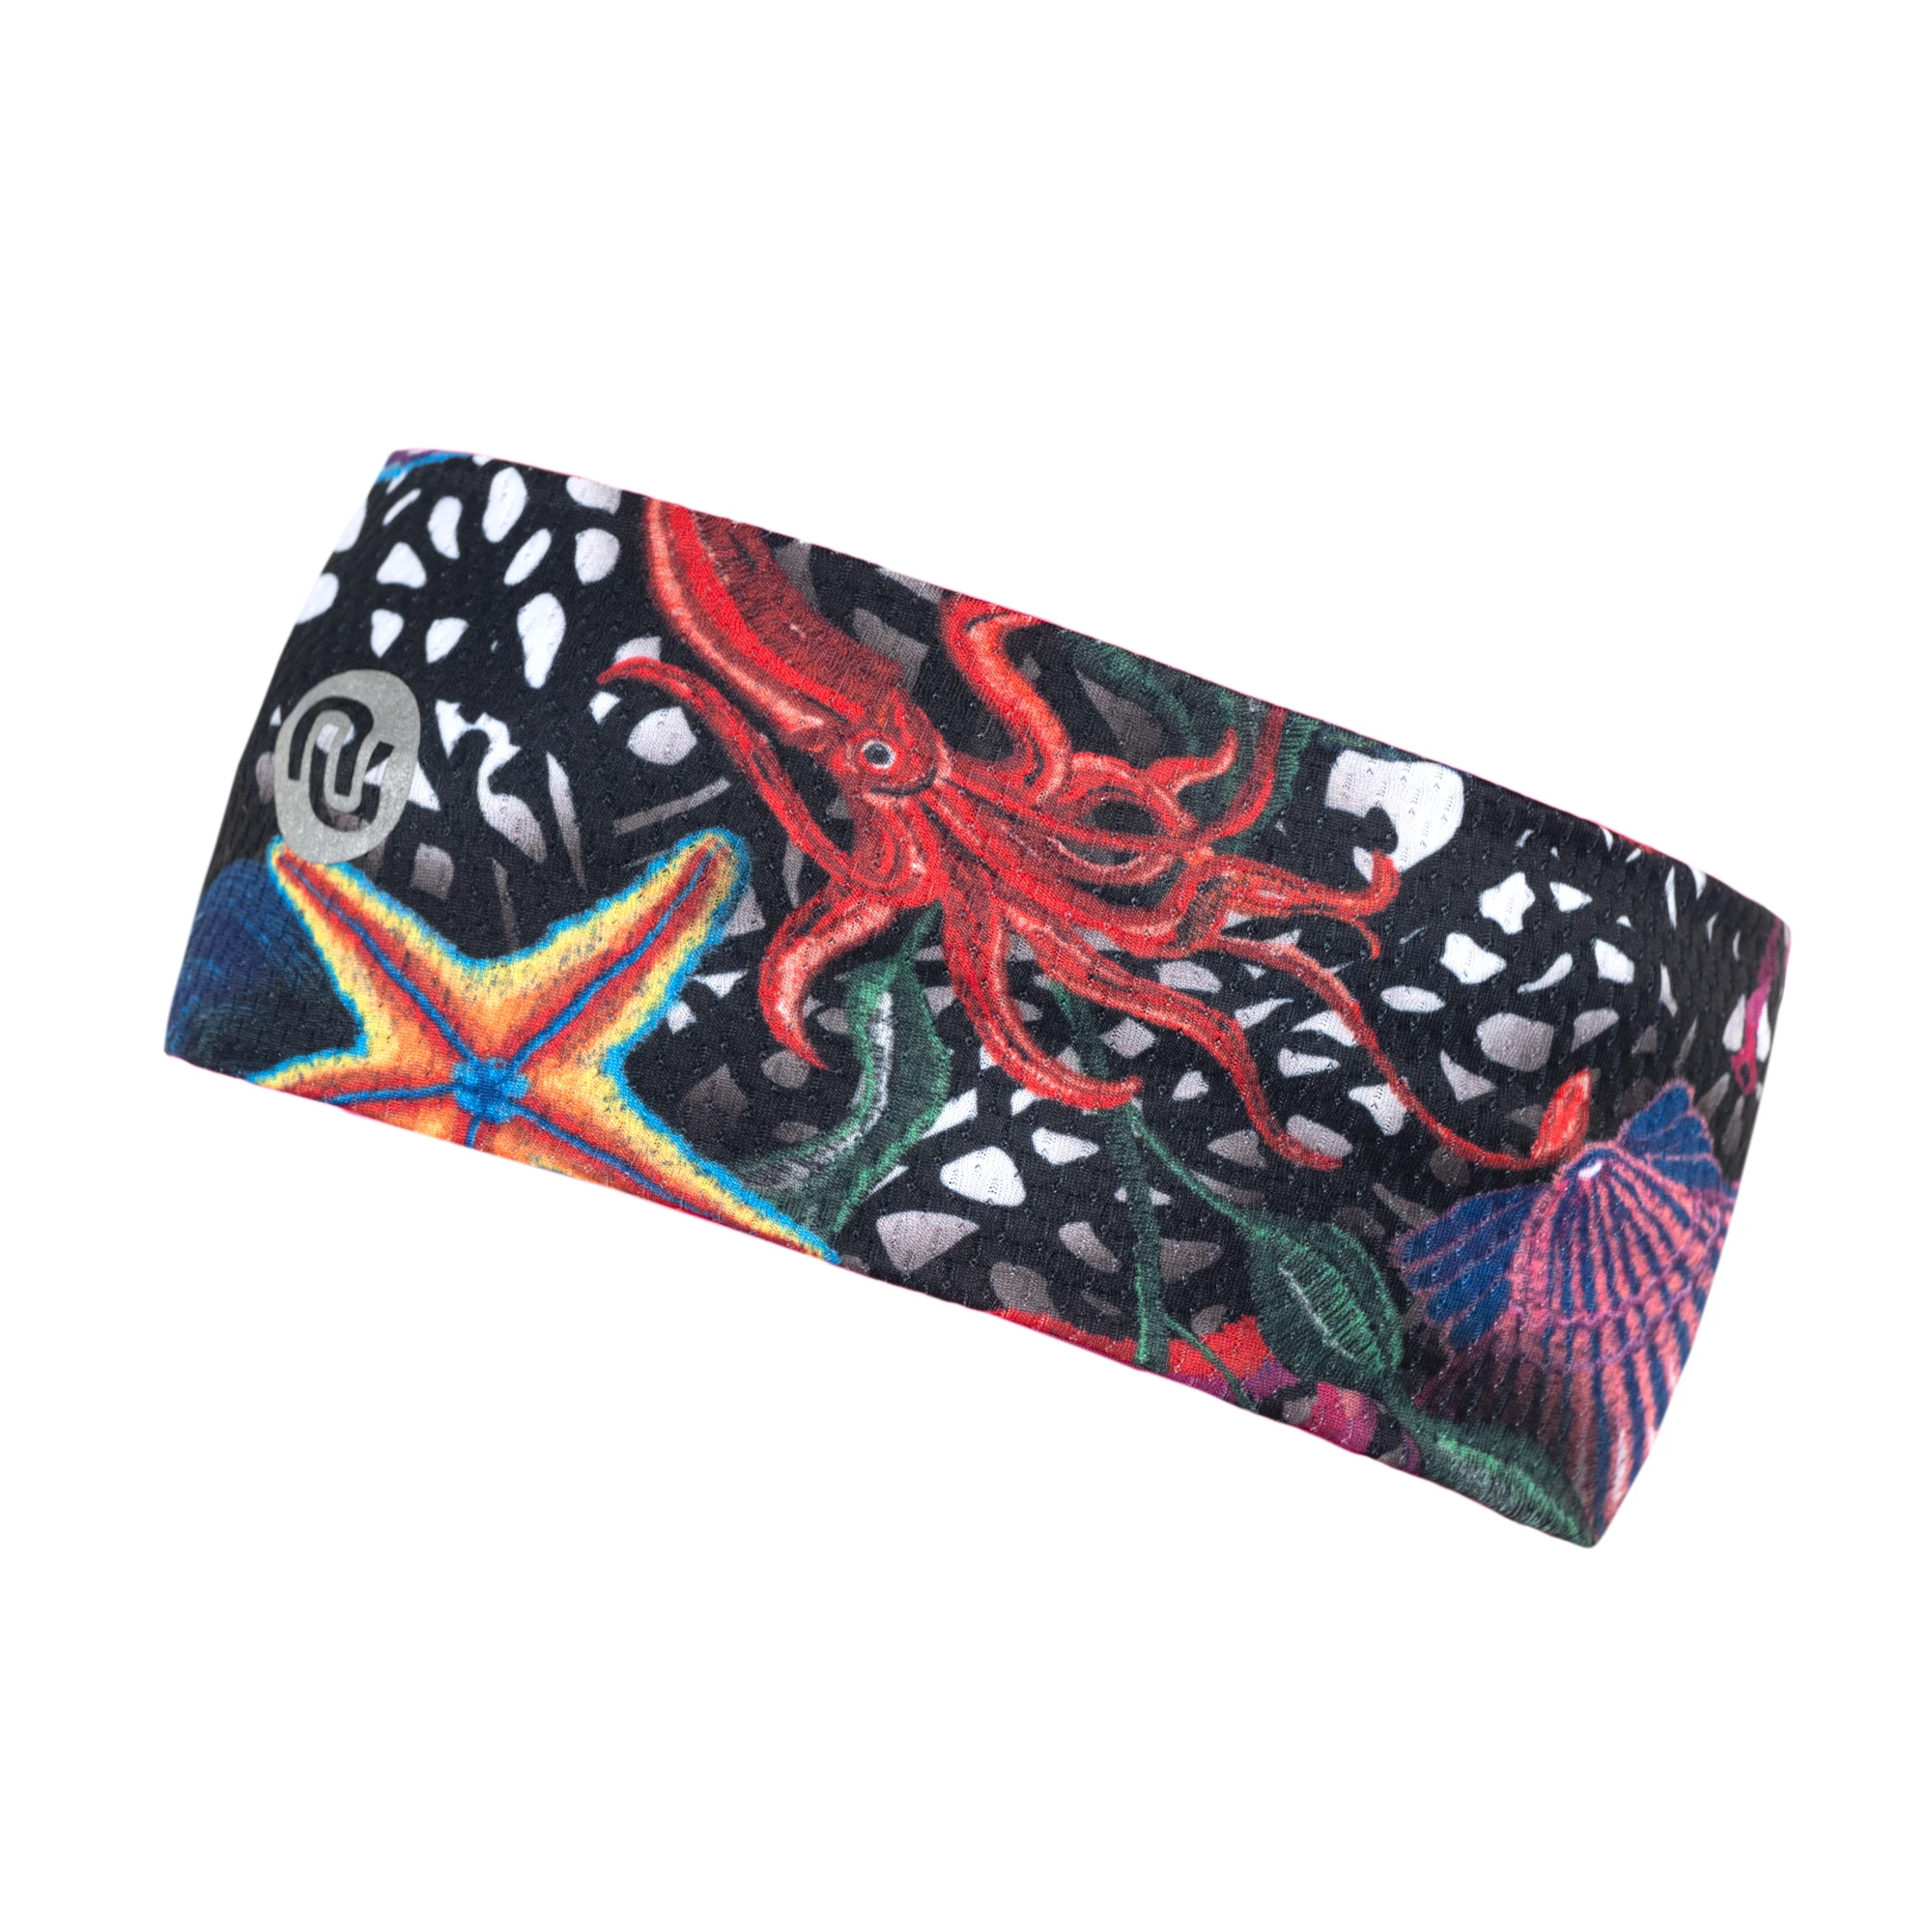 relayinert Stretchy Sports Headband Hair In Place And Stay Fresh Throughout  Day Comfortable To Wear Green 